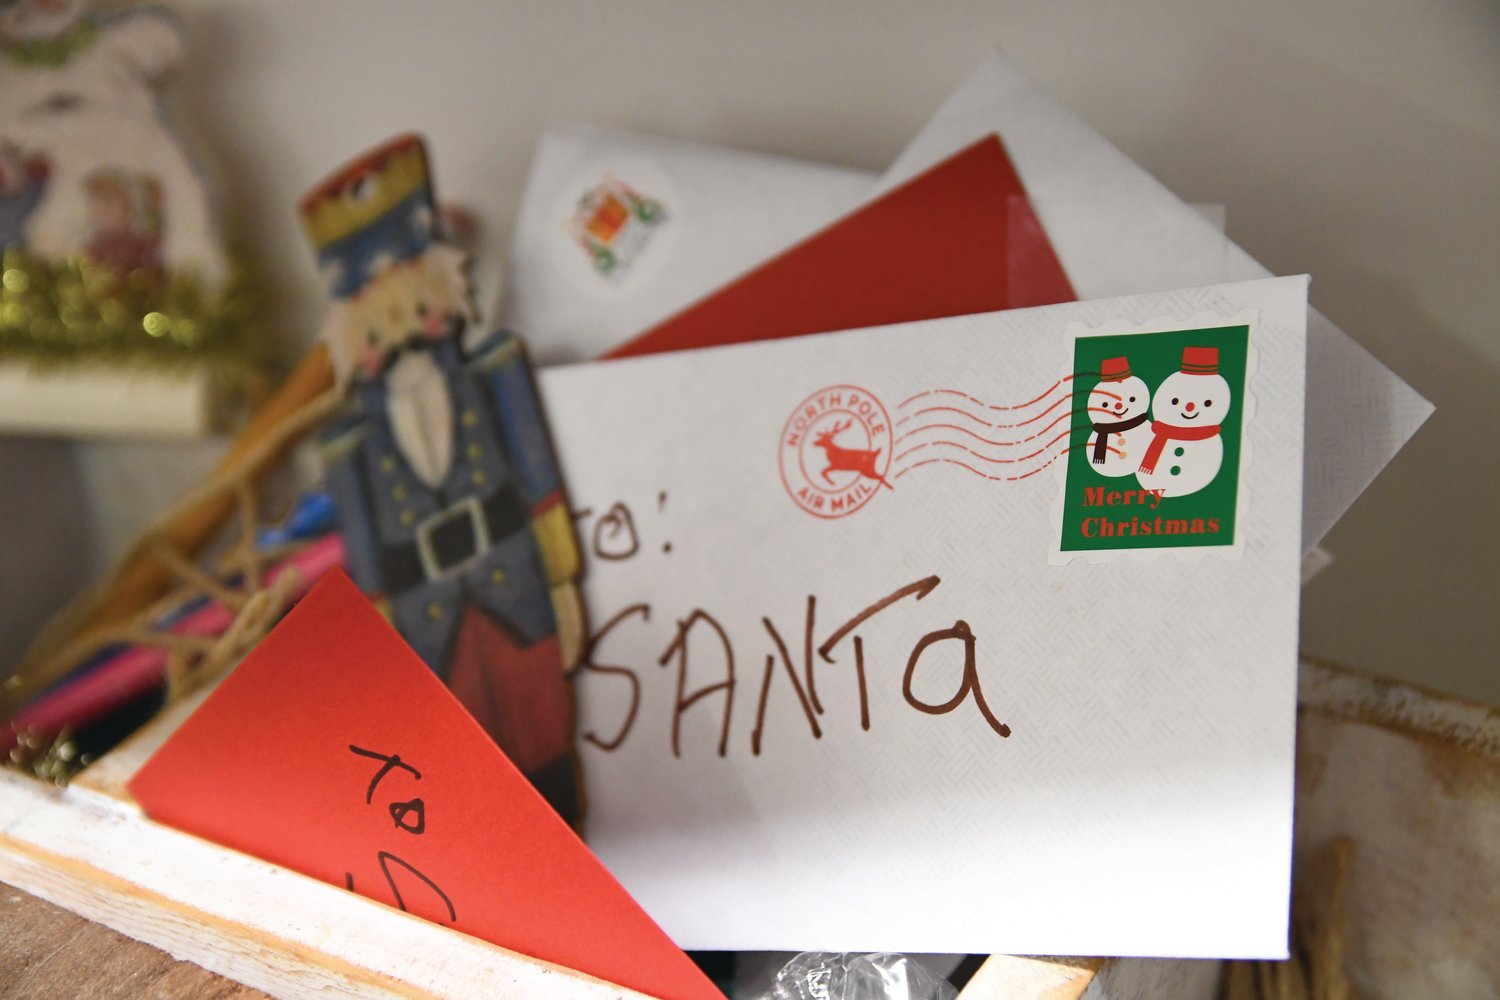 Children will be able to write their own letters to Santa at the Christmas post office where elves will have stationary on hand.